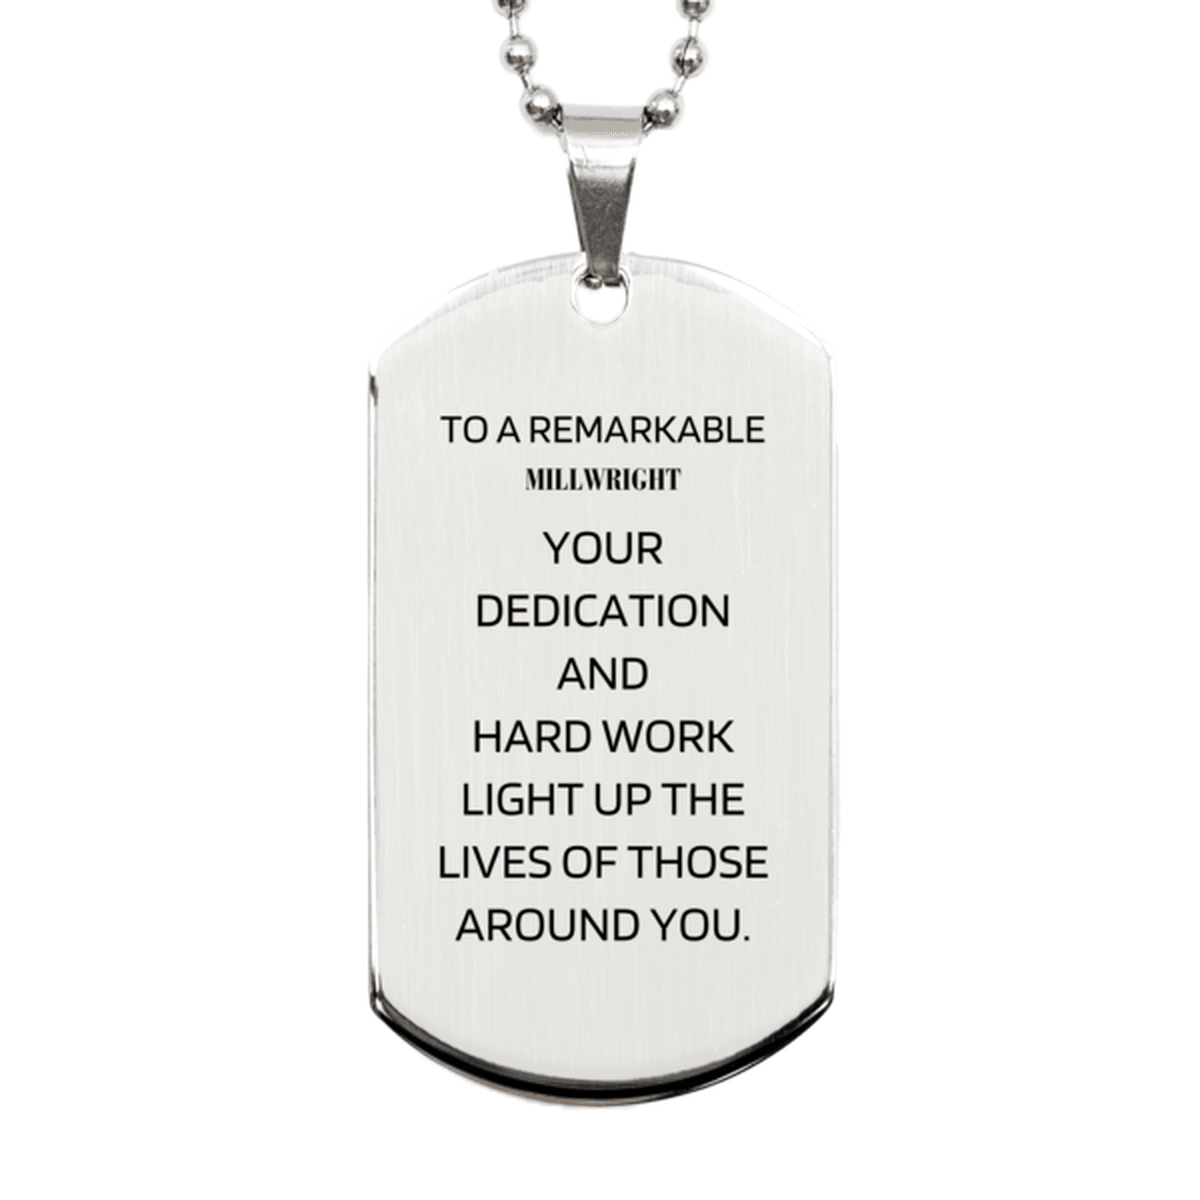 Remarkable Millwright Gifts, Your dedication and hard work, Inspirational Birthday Christmas Unique Silver Dog Tag For Millwright, Coworkers, Men, Women, Friends - Mallard Moon Gift Shop